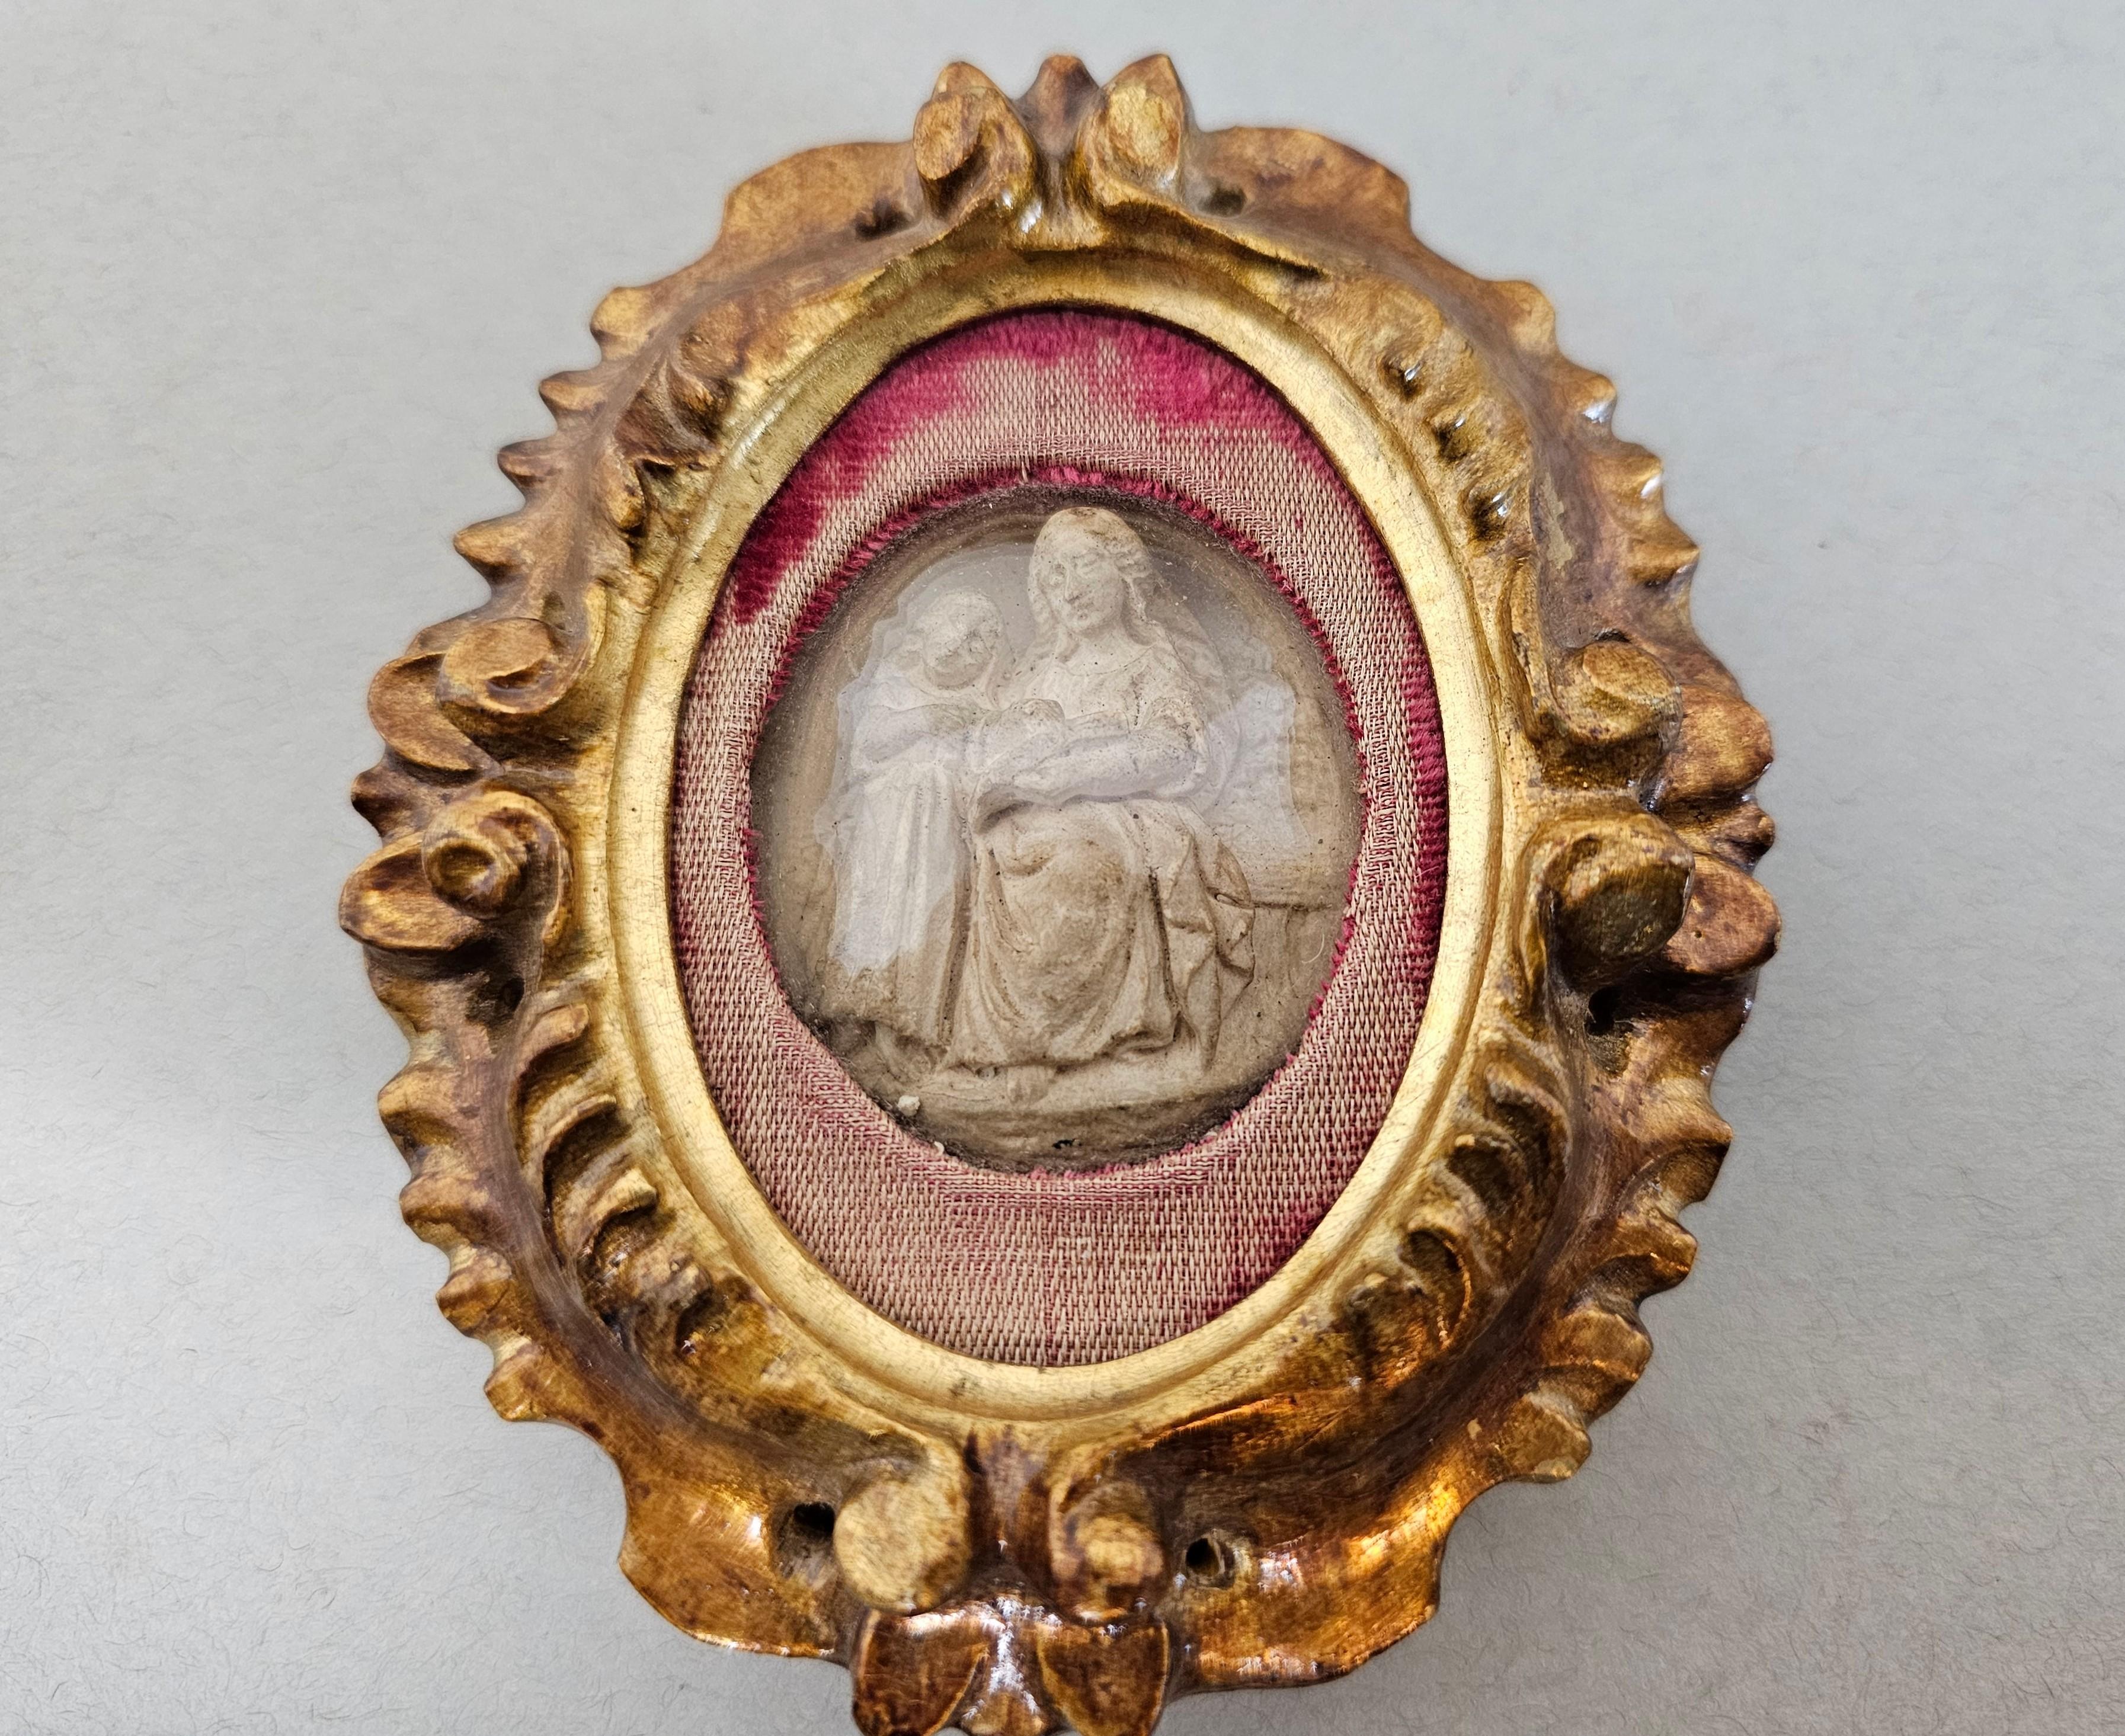 Antique Italian Religious Giltwood Reliquary Relief Carved Sculpture In Good Condition For Sale In Forney, TX